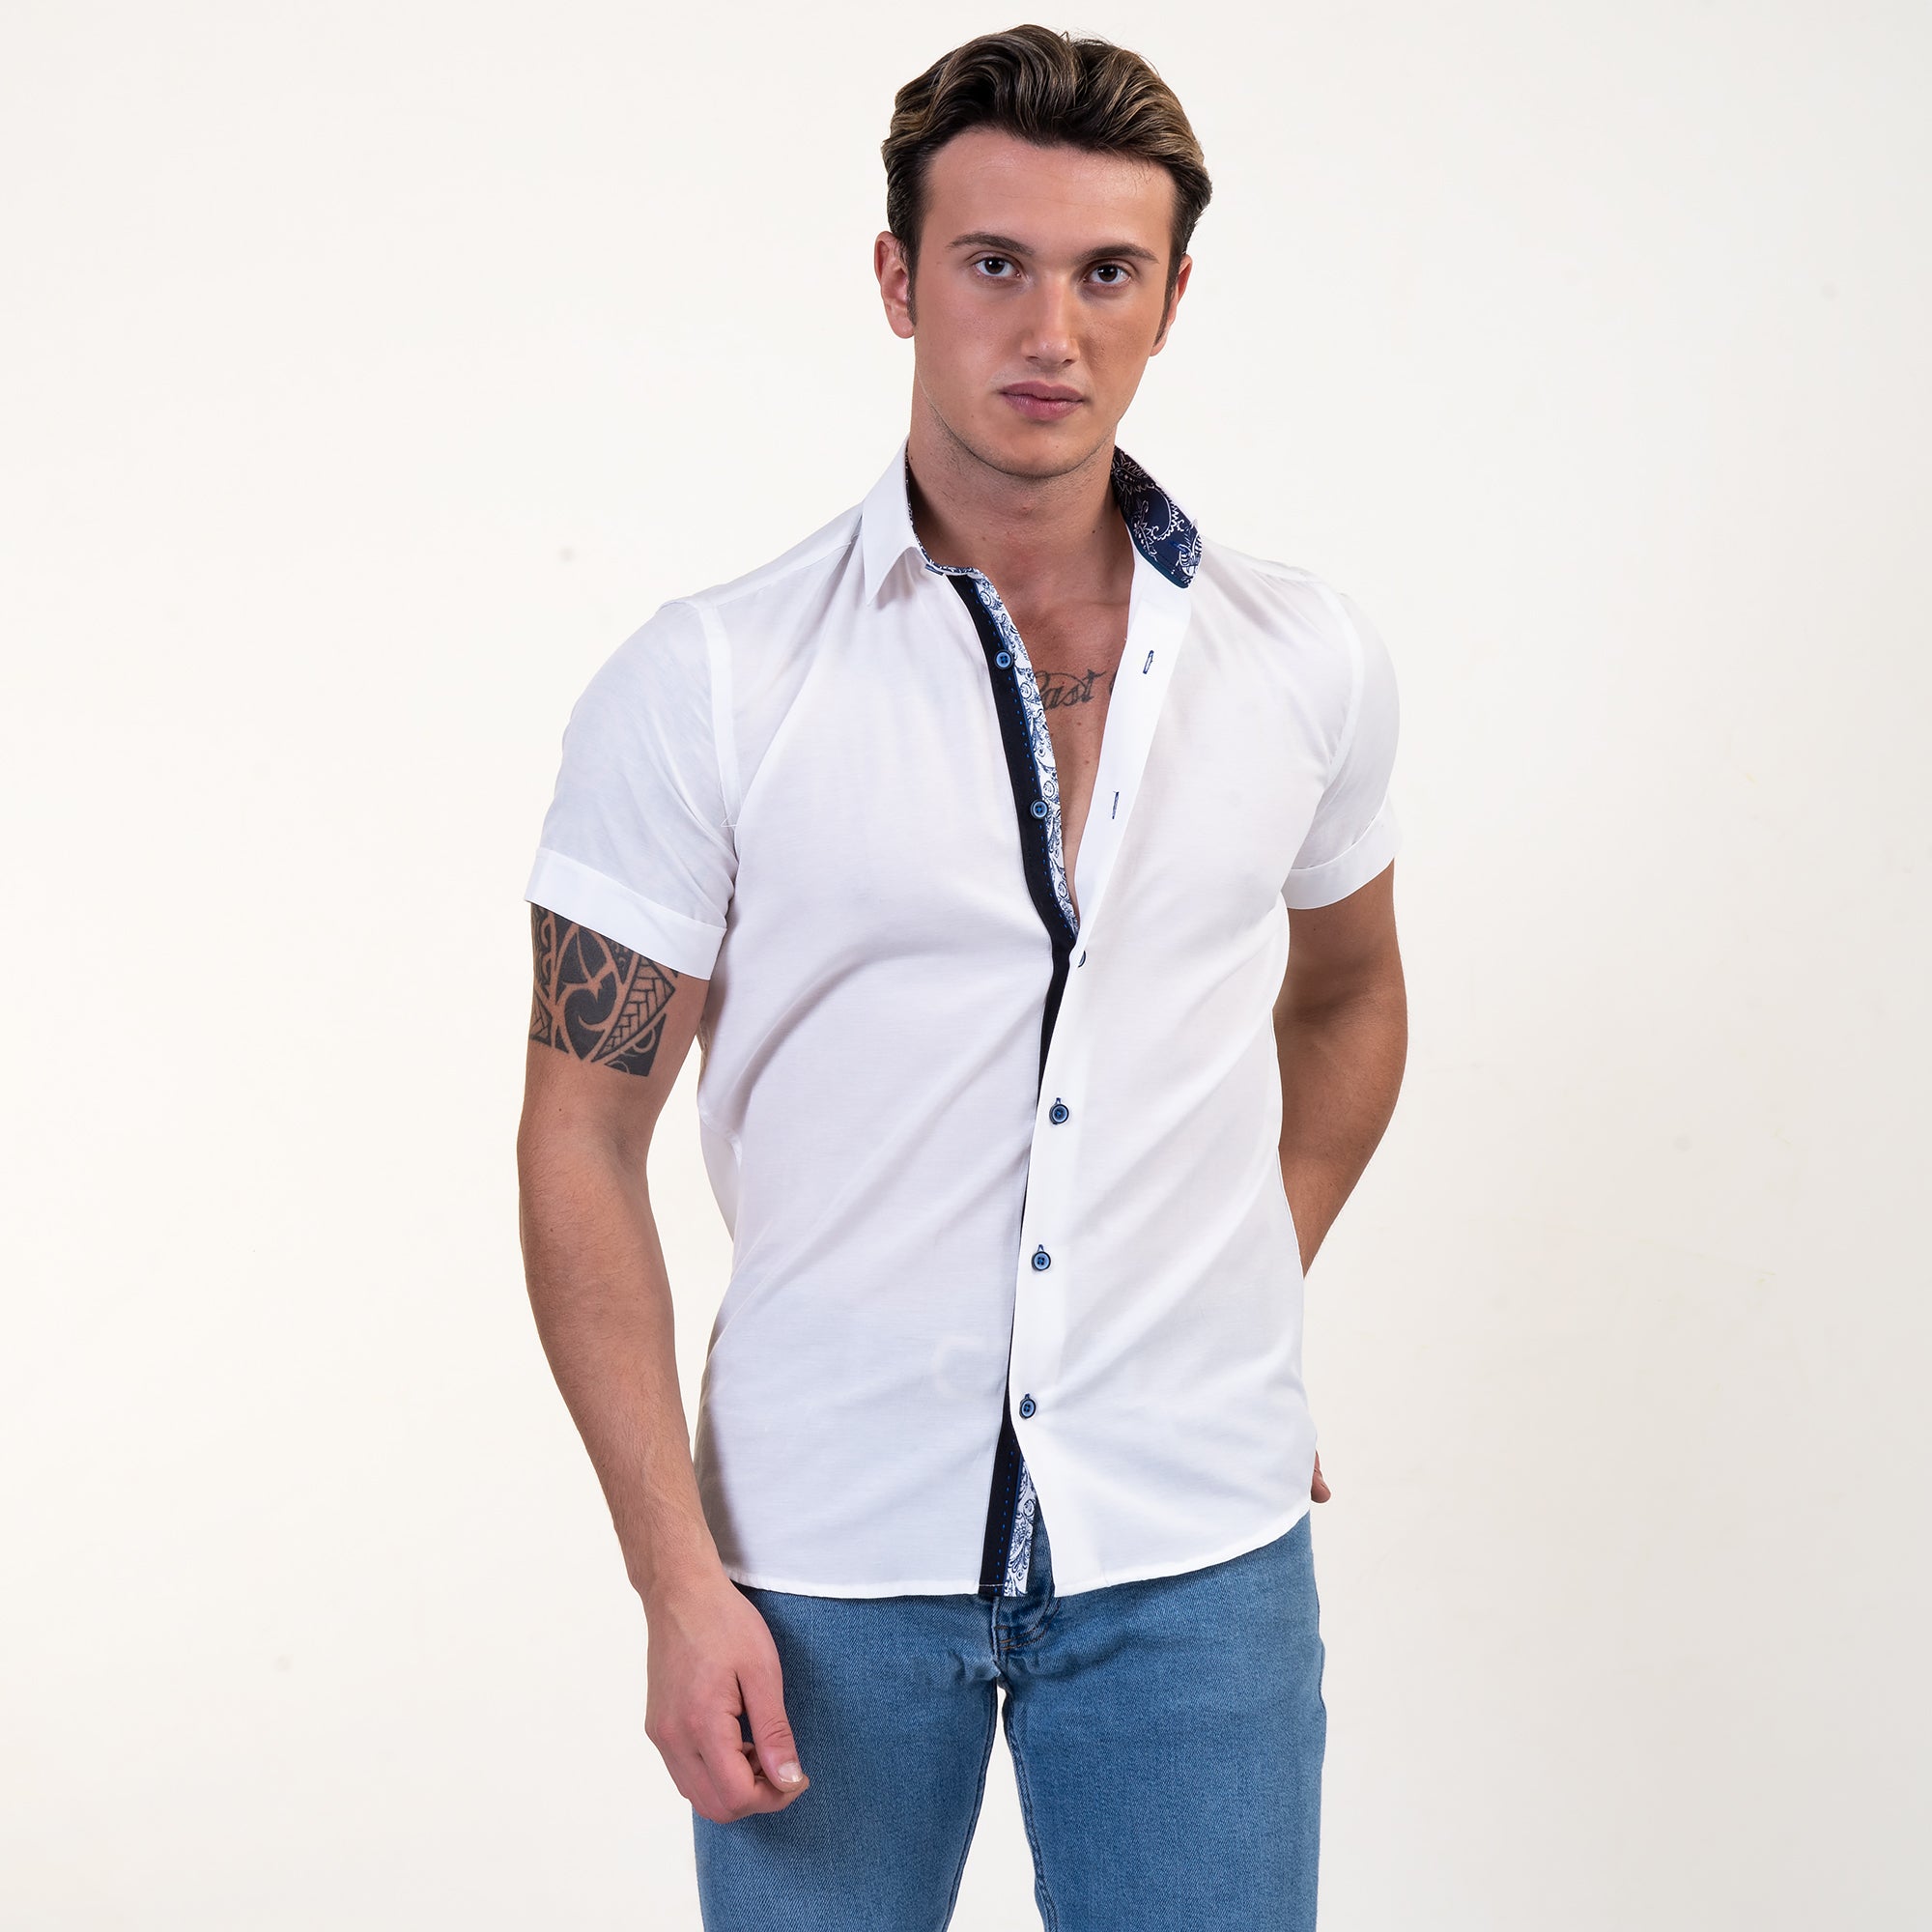 Solid White Mens Short Sleeve Button up Shirts - Tailored Slim Fit Cotton Dress Shirts